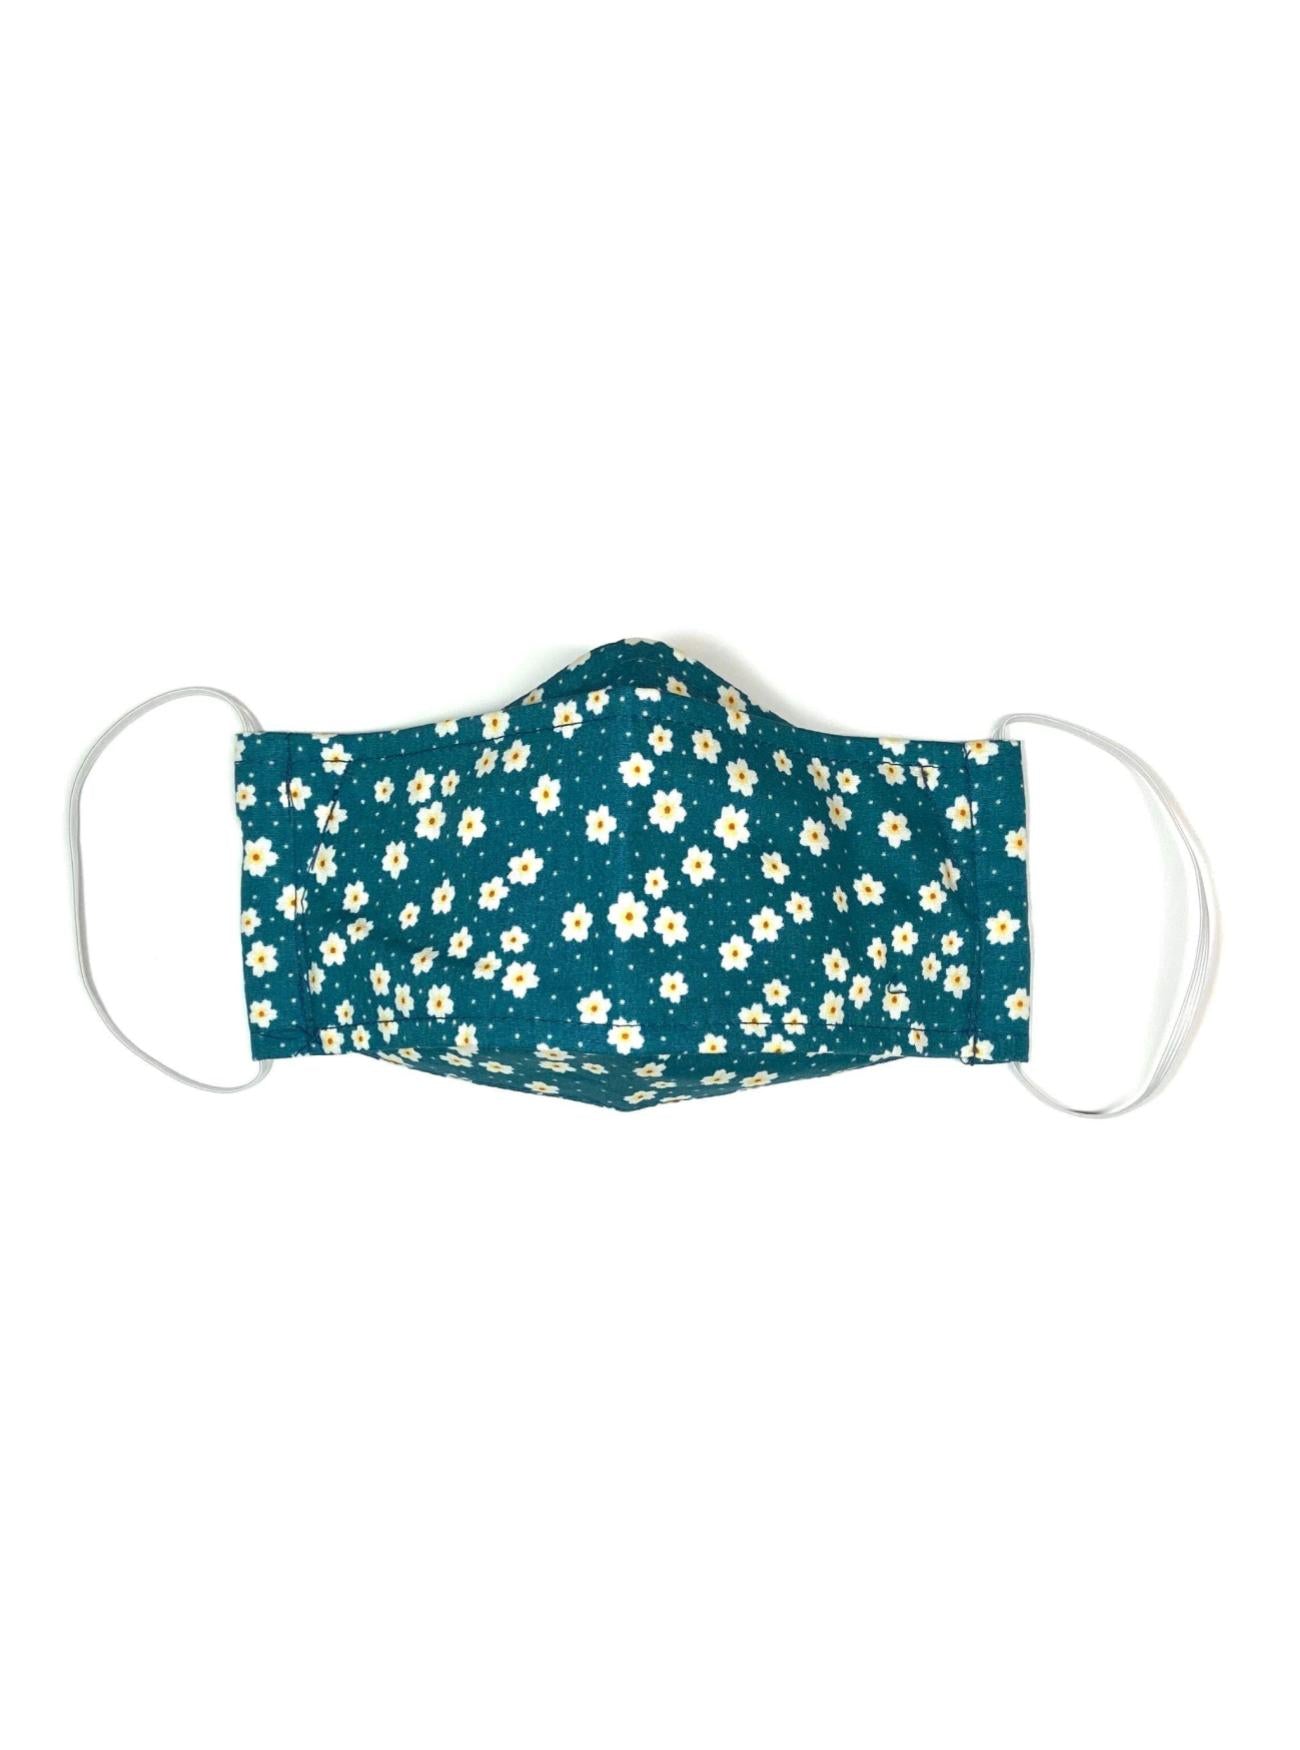 Teal Blue Floral, Child's Reusable Face Mask [2-layers]